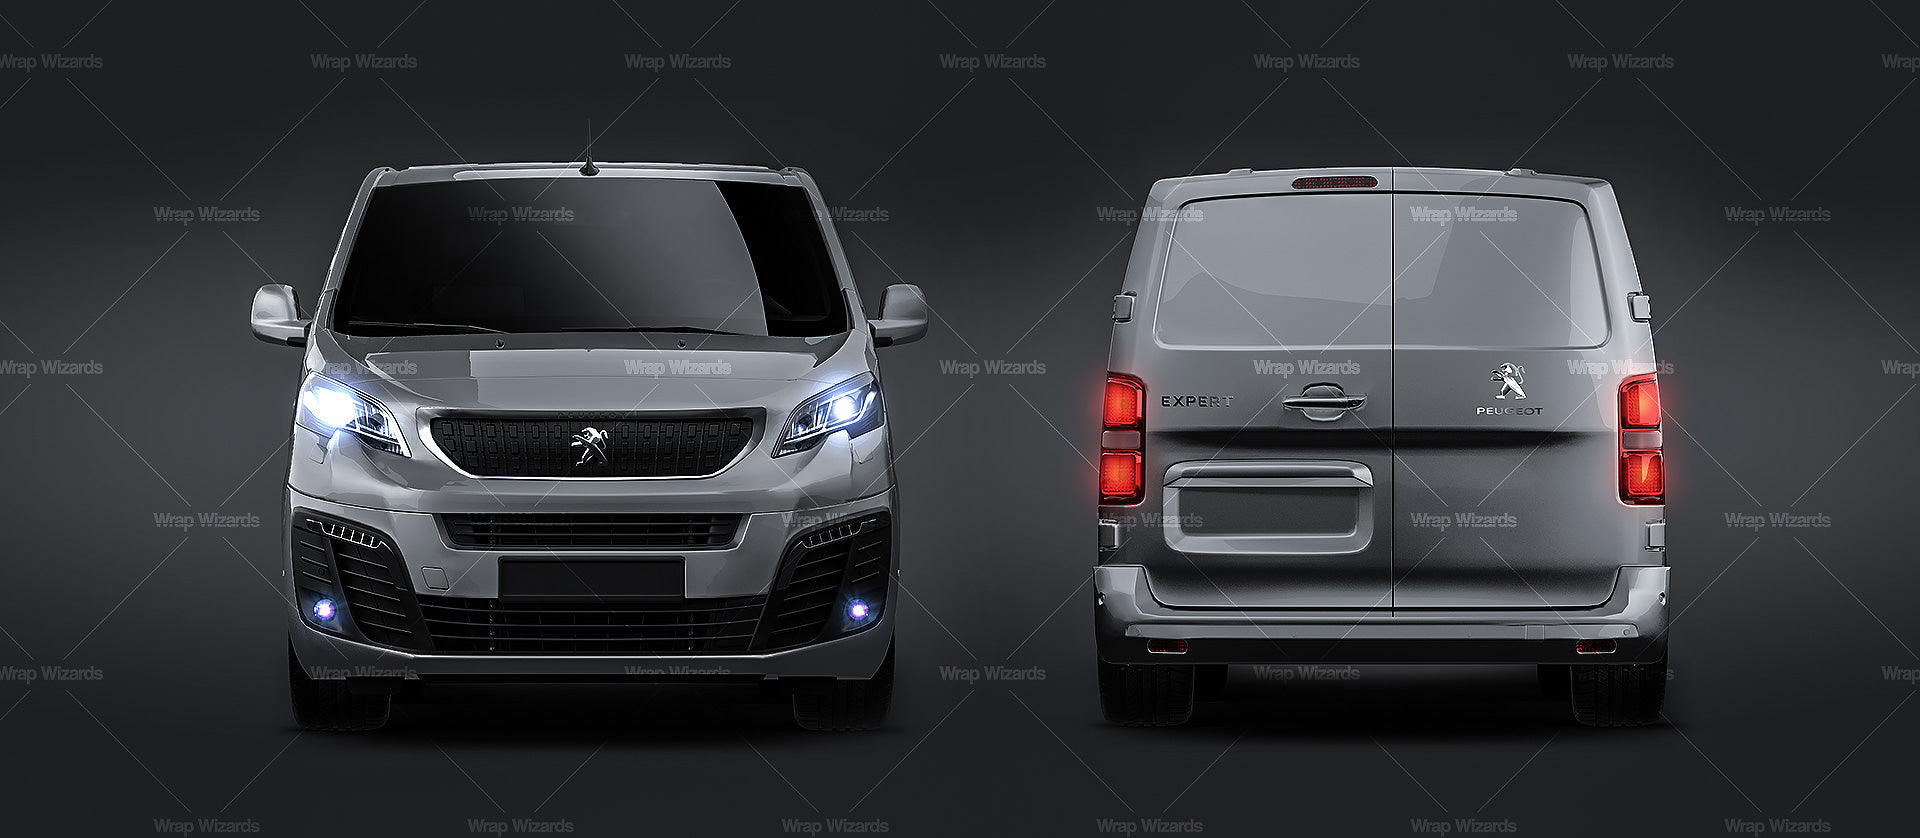 Peugeot Expert L3 glossy finish - all sides Car Mockup Template.psd